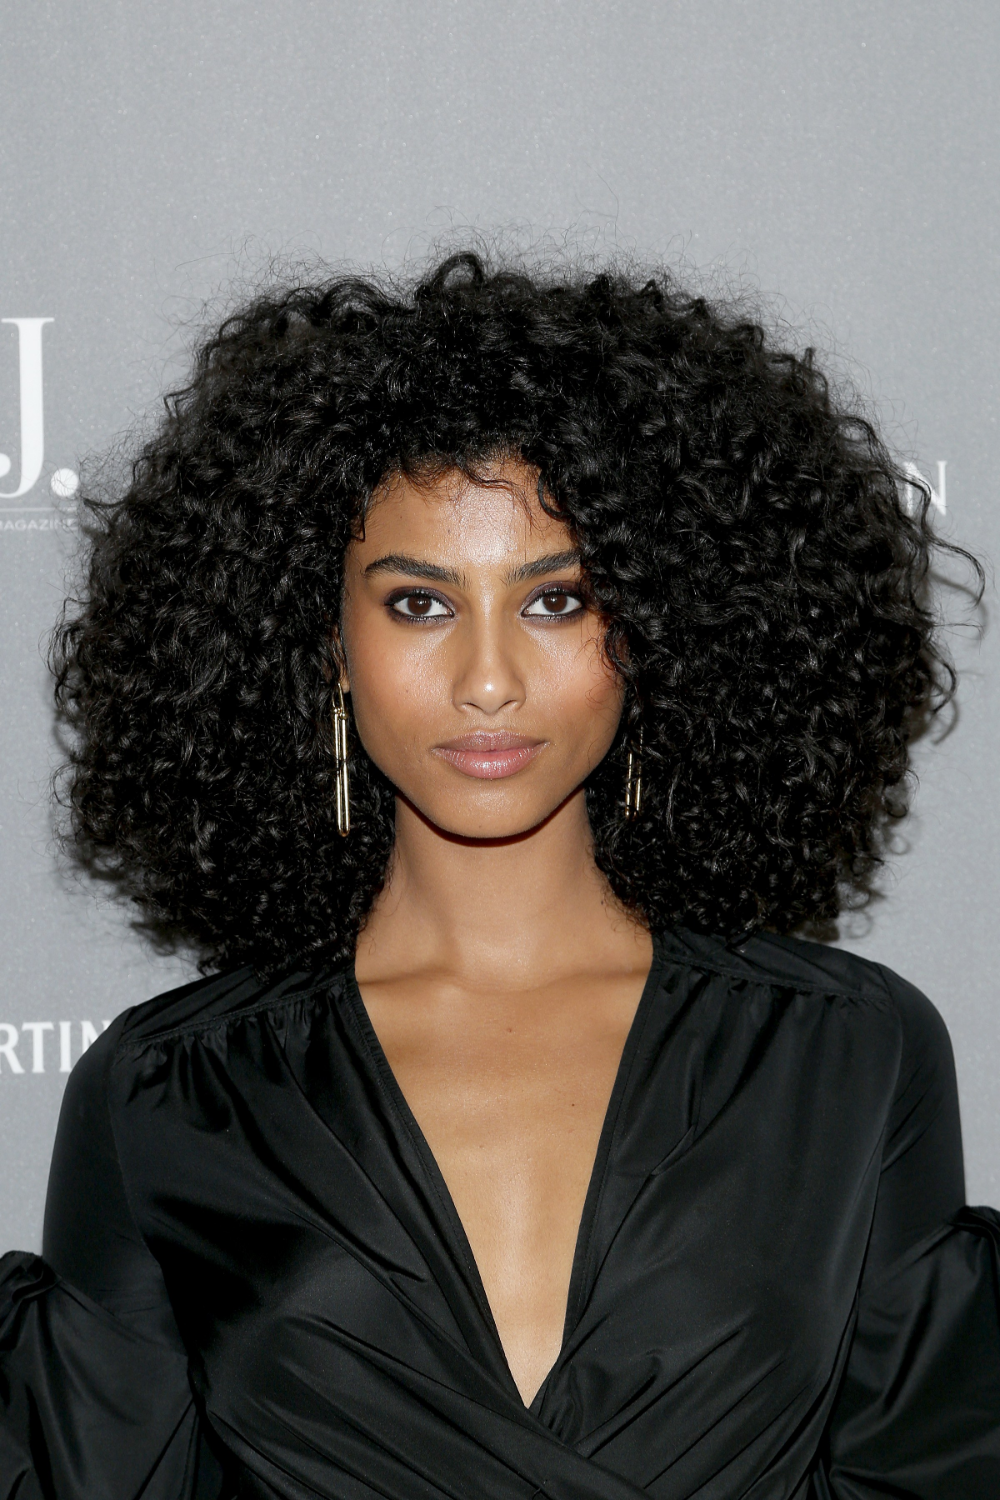 Imaan Hammam's Lustrous Curls and Liner Are an Evening Beauty Win - Imaan Hammam's Lustrous Curls and Liner Are an Evening Beauty Win -   12 beauty Black pictures ideas